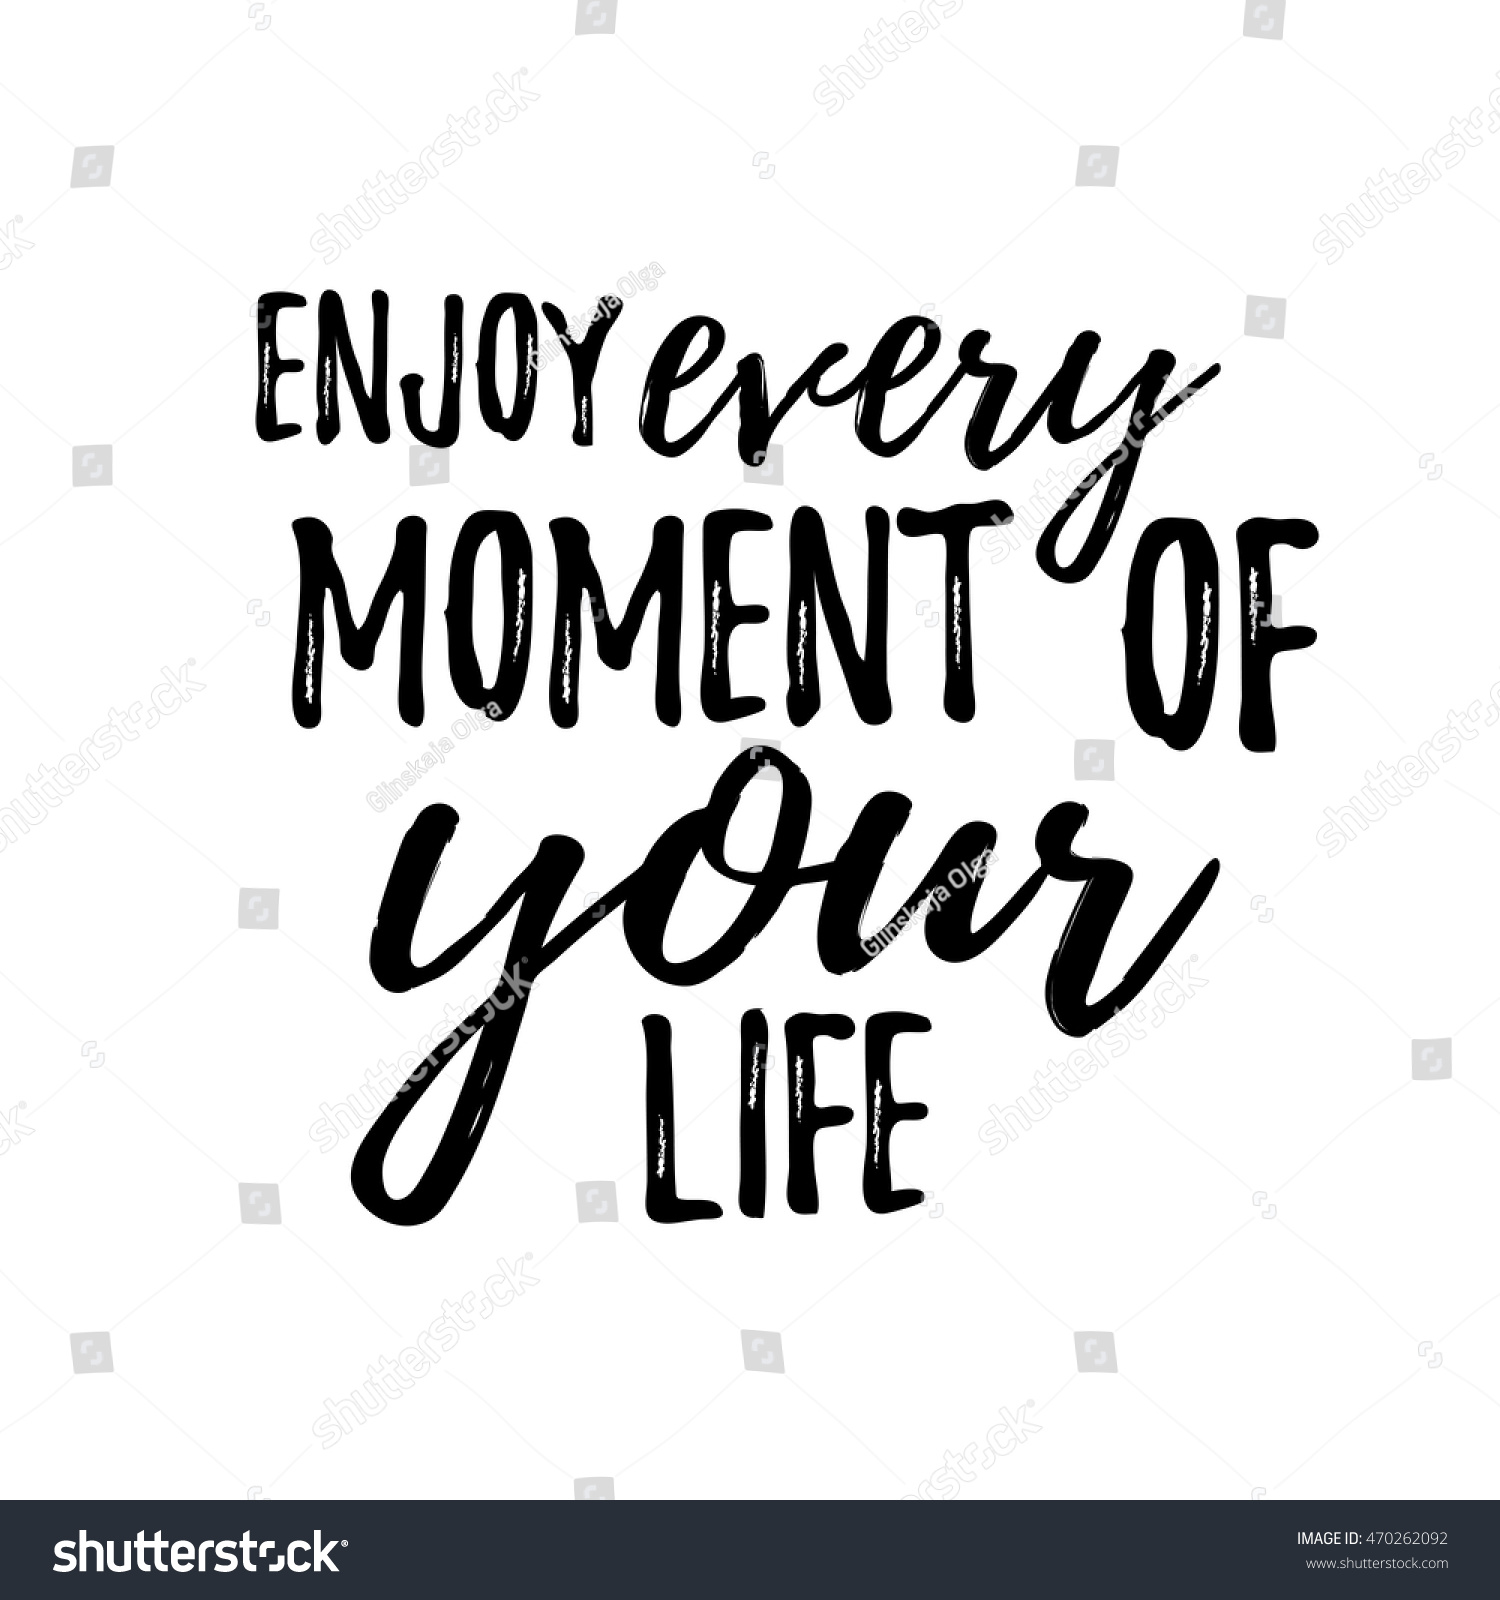 Enjoy every moment of your life Typographic motivational inspirational quote Lettering inspirational quote design